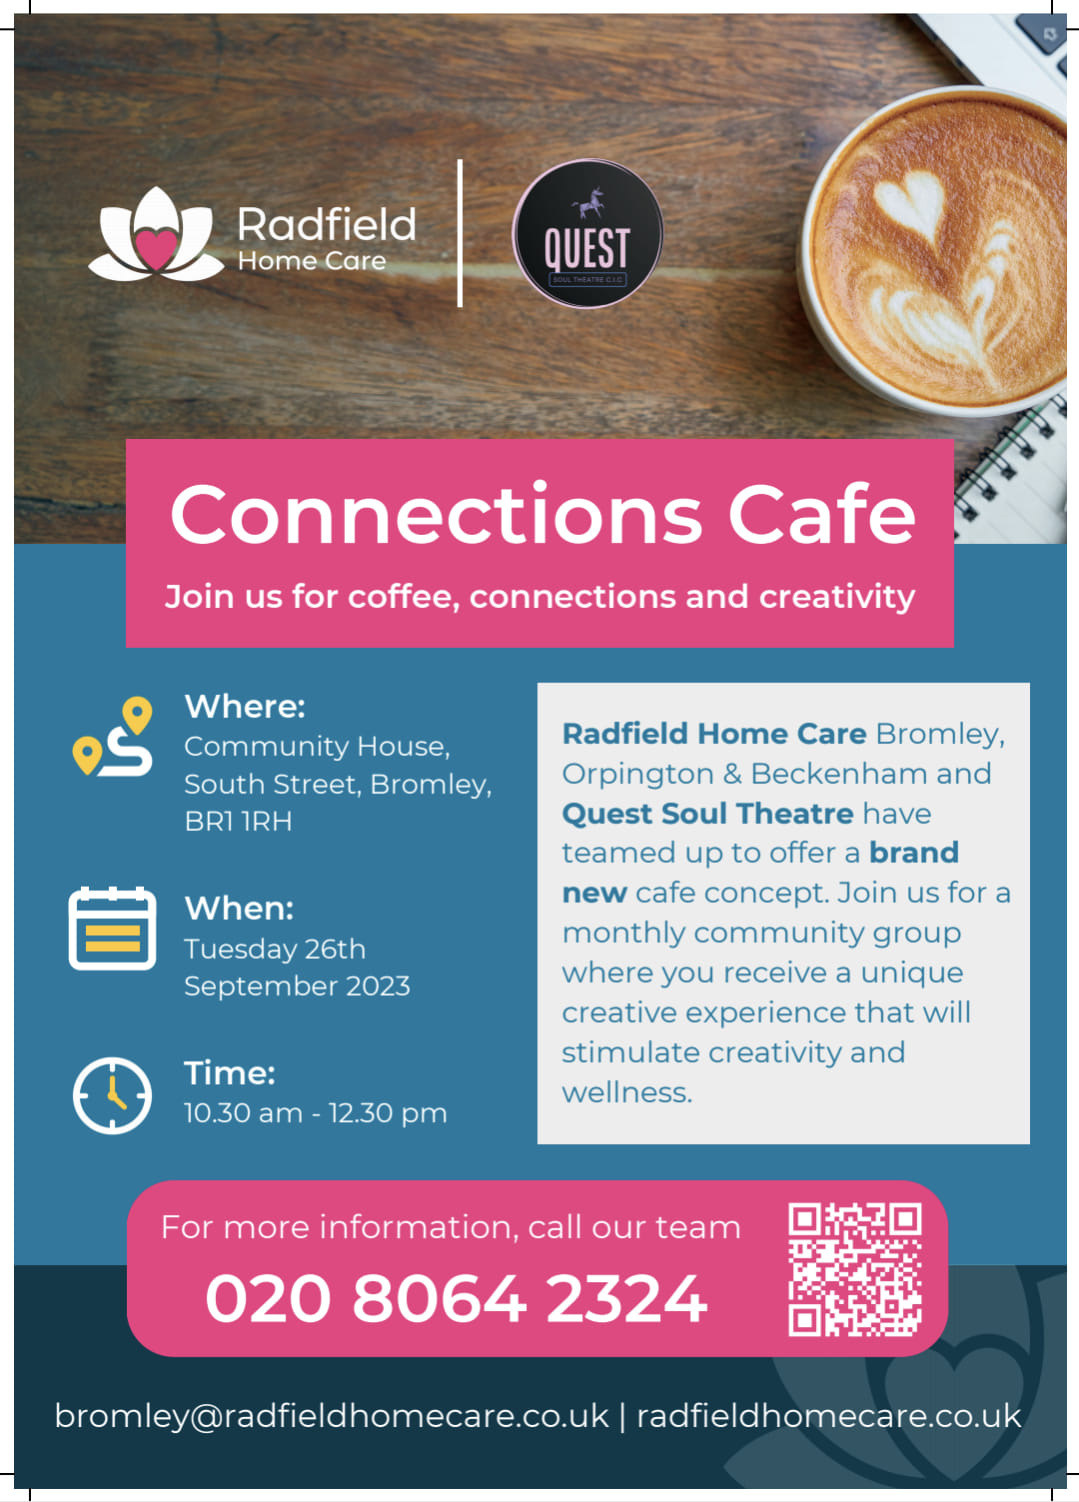 Connections Cafe flyer image